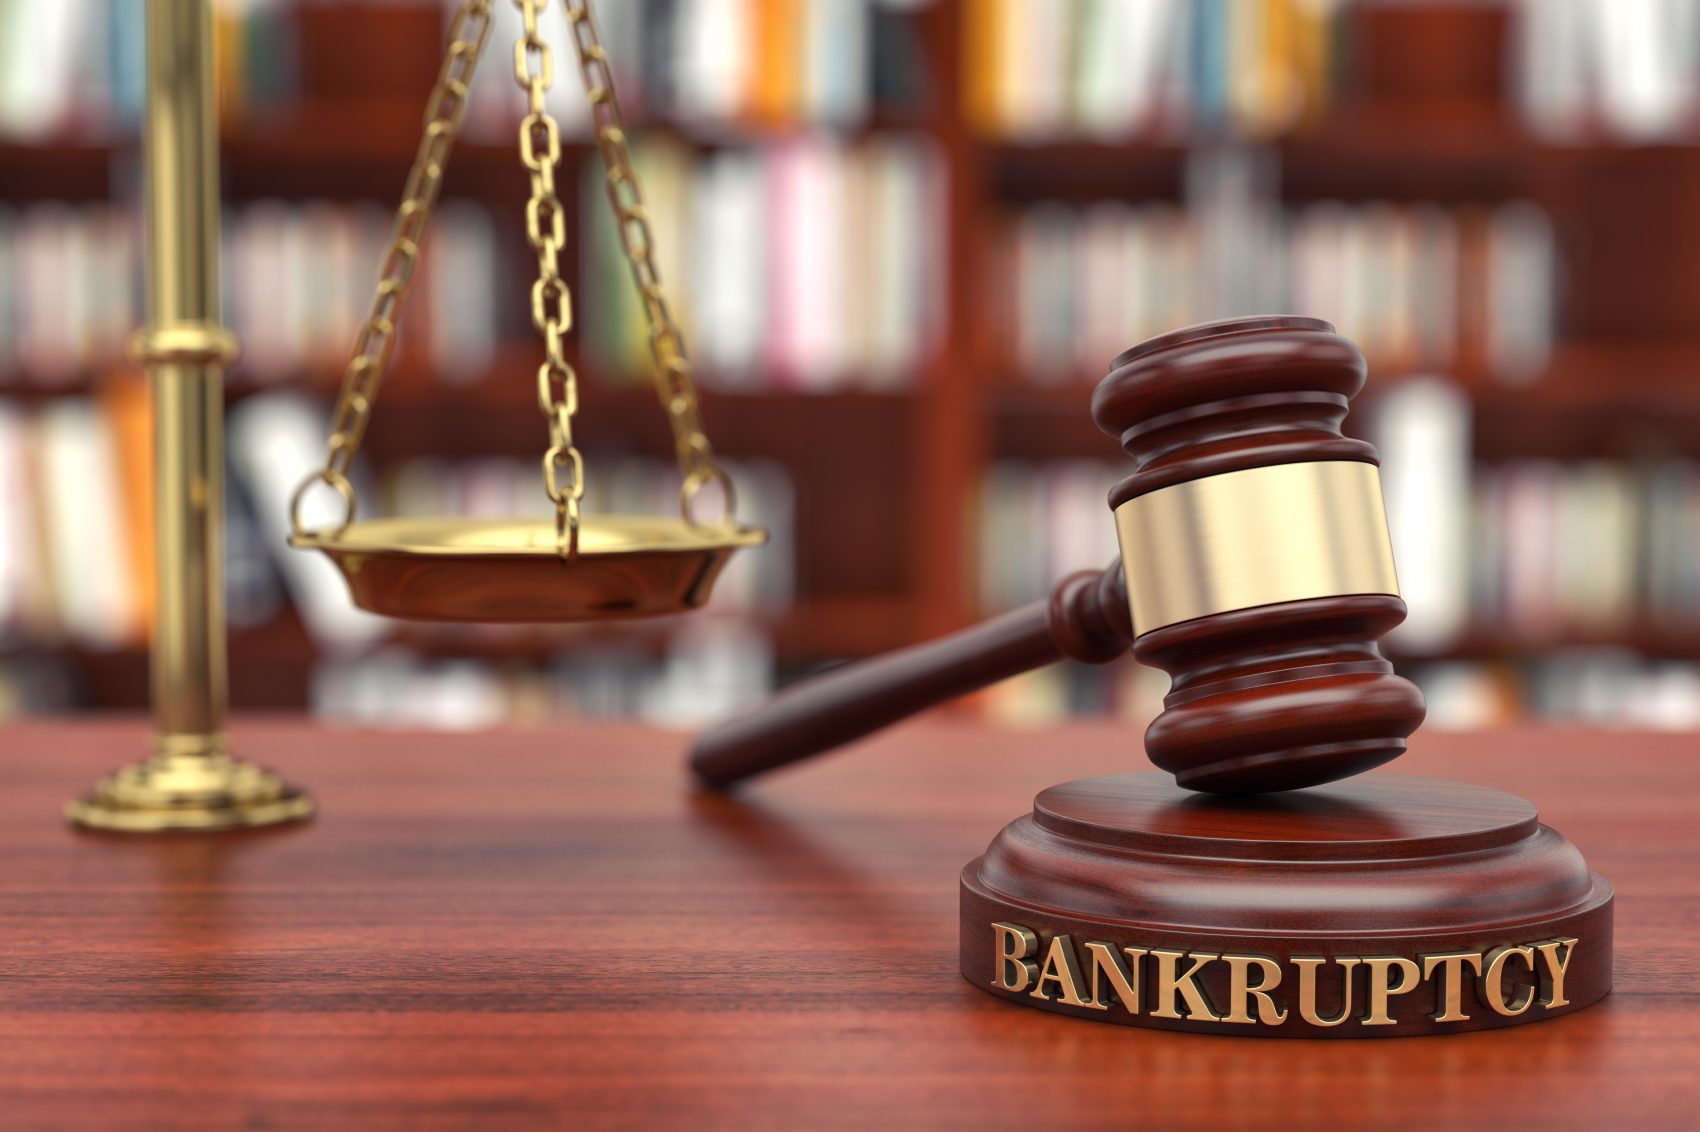 Gary Bankruptcy Lawyers